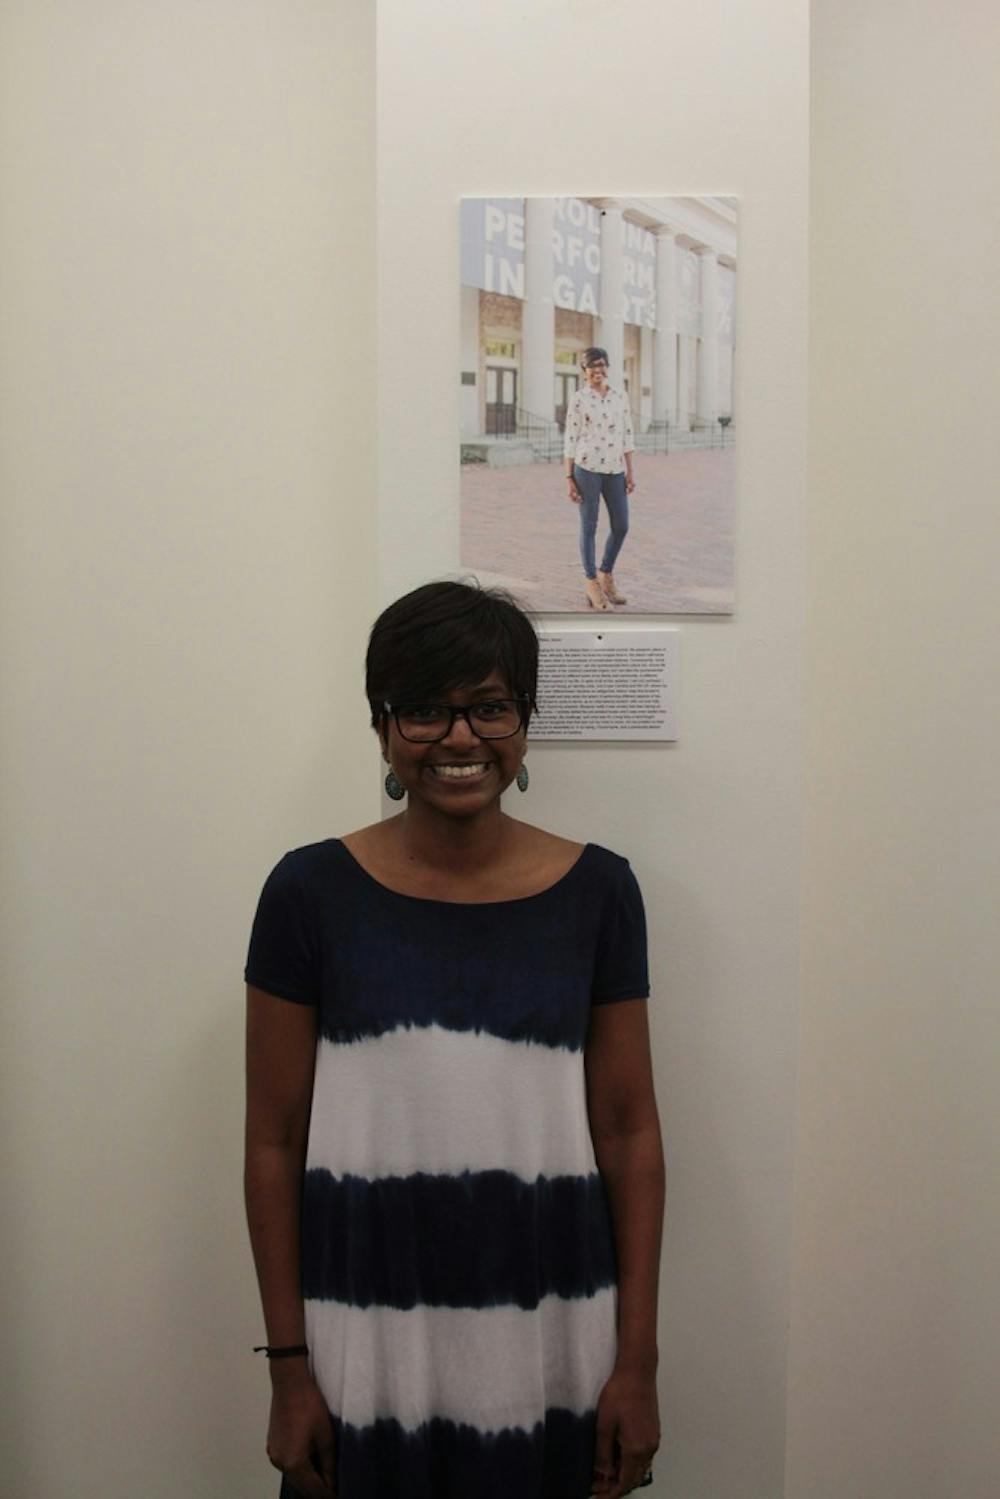 Student Sharanya Thiru poses in front of her portrait in the series of pictures as part of the "I, Too, Am Carolina" exhibit.